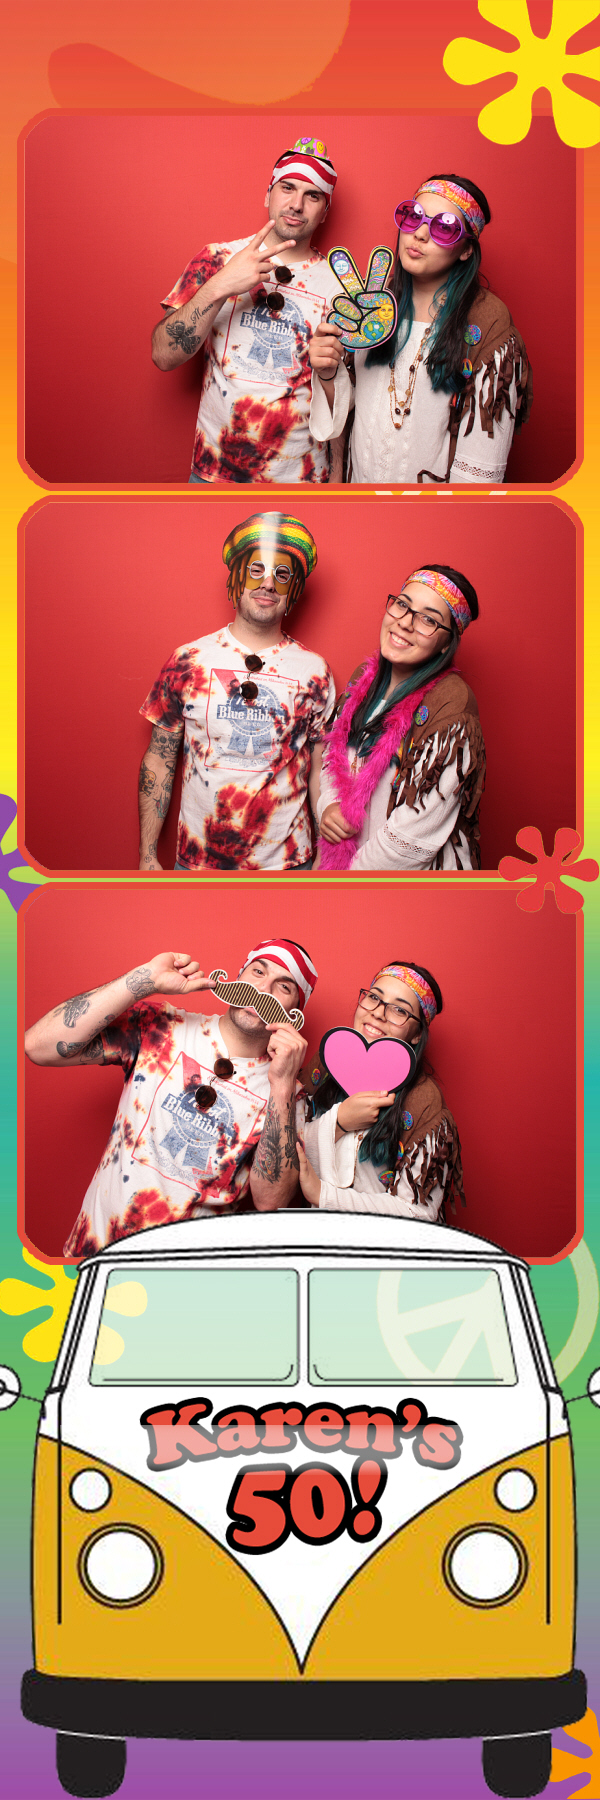 2x6 photo template of couple posing with red backdrop and props